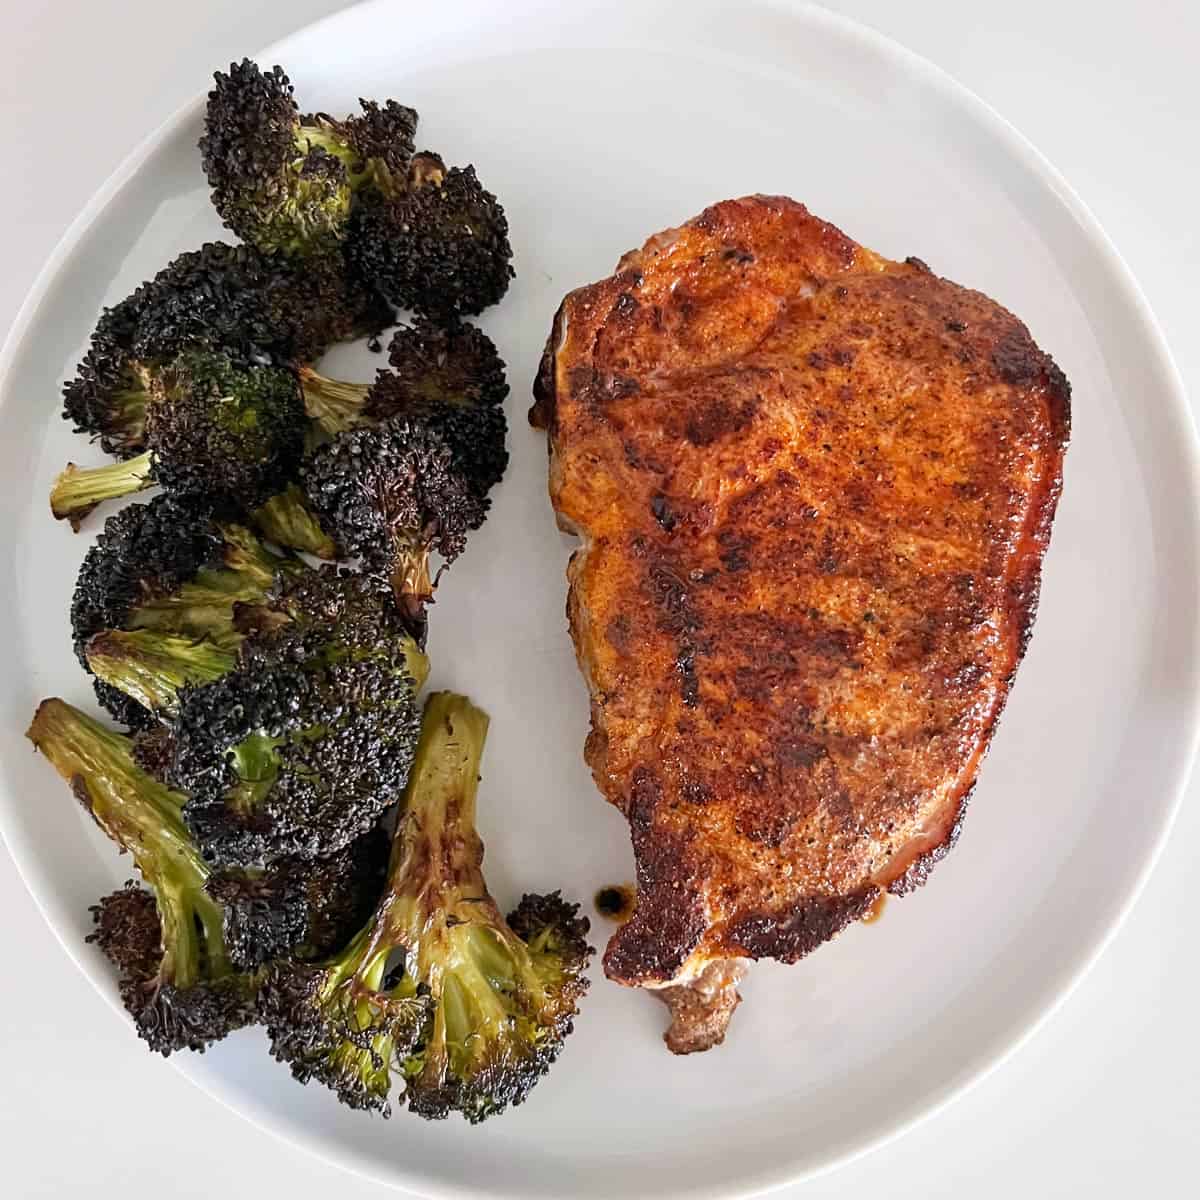 A pork chop is served with roasted broccoli.